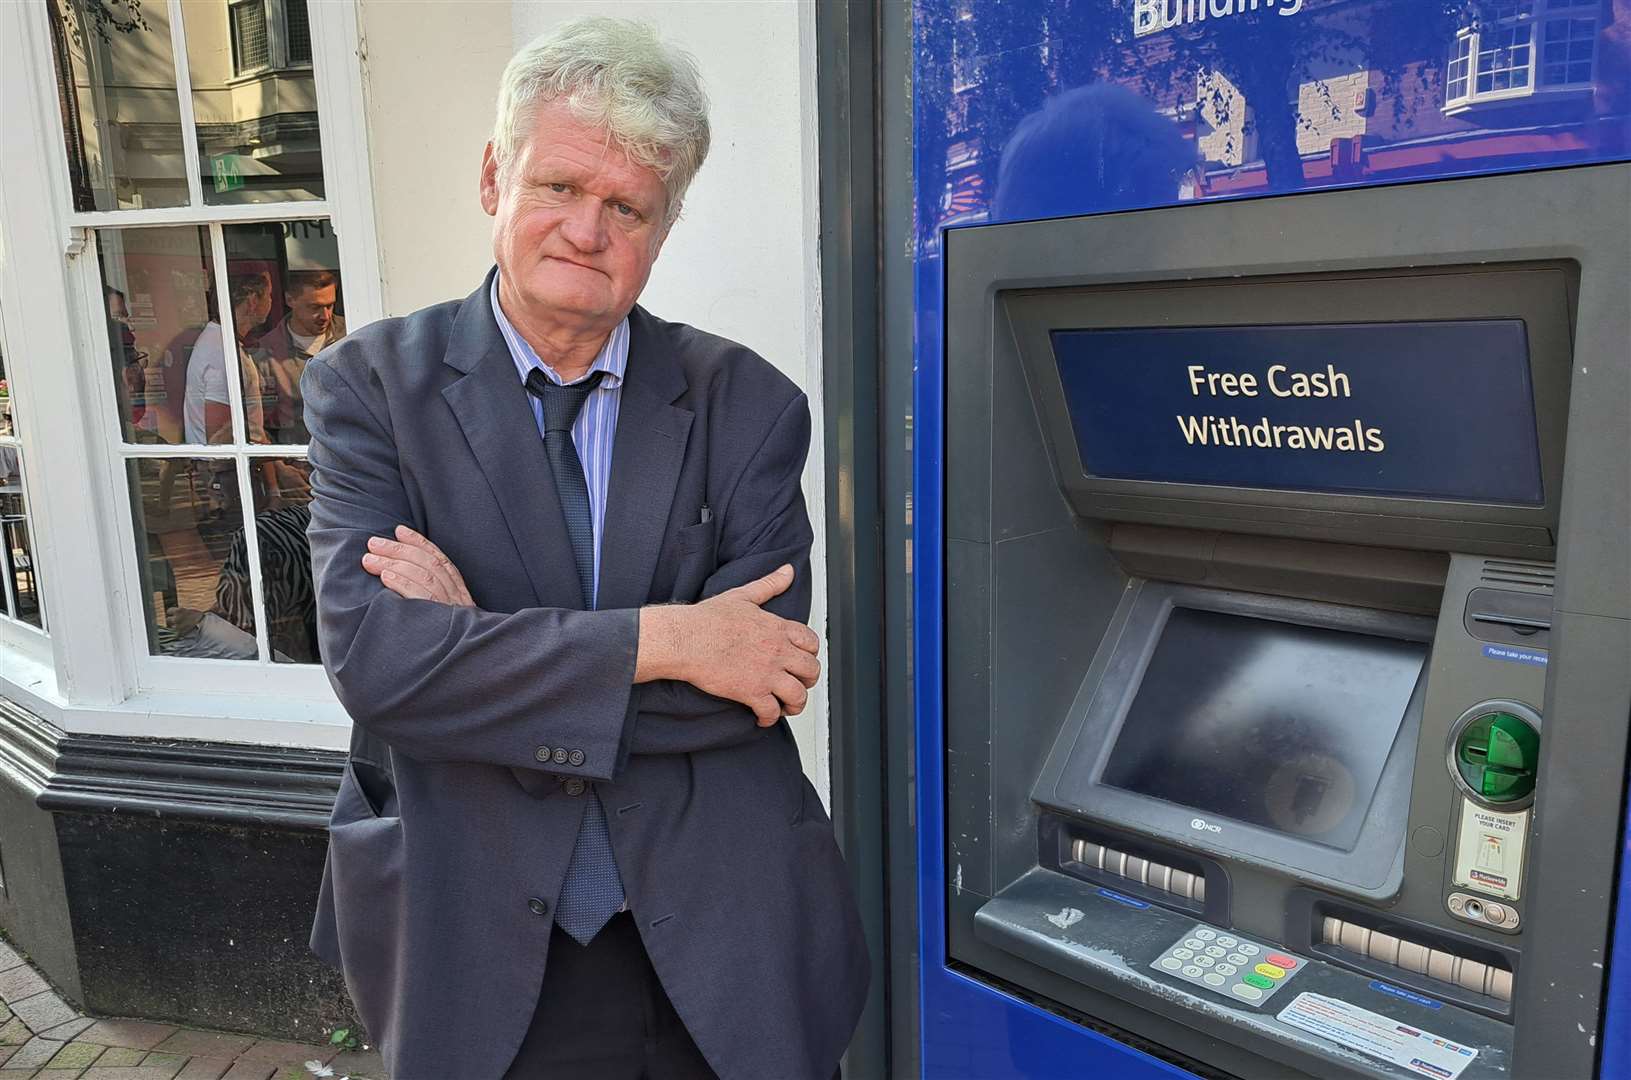 Not for me, thank you. Our man has never tried to use an outdoor cash machine